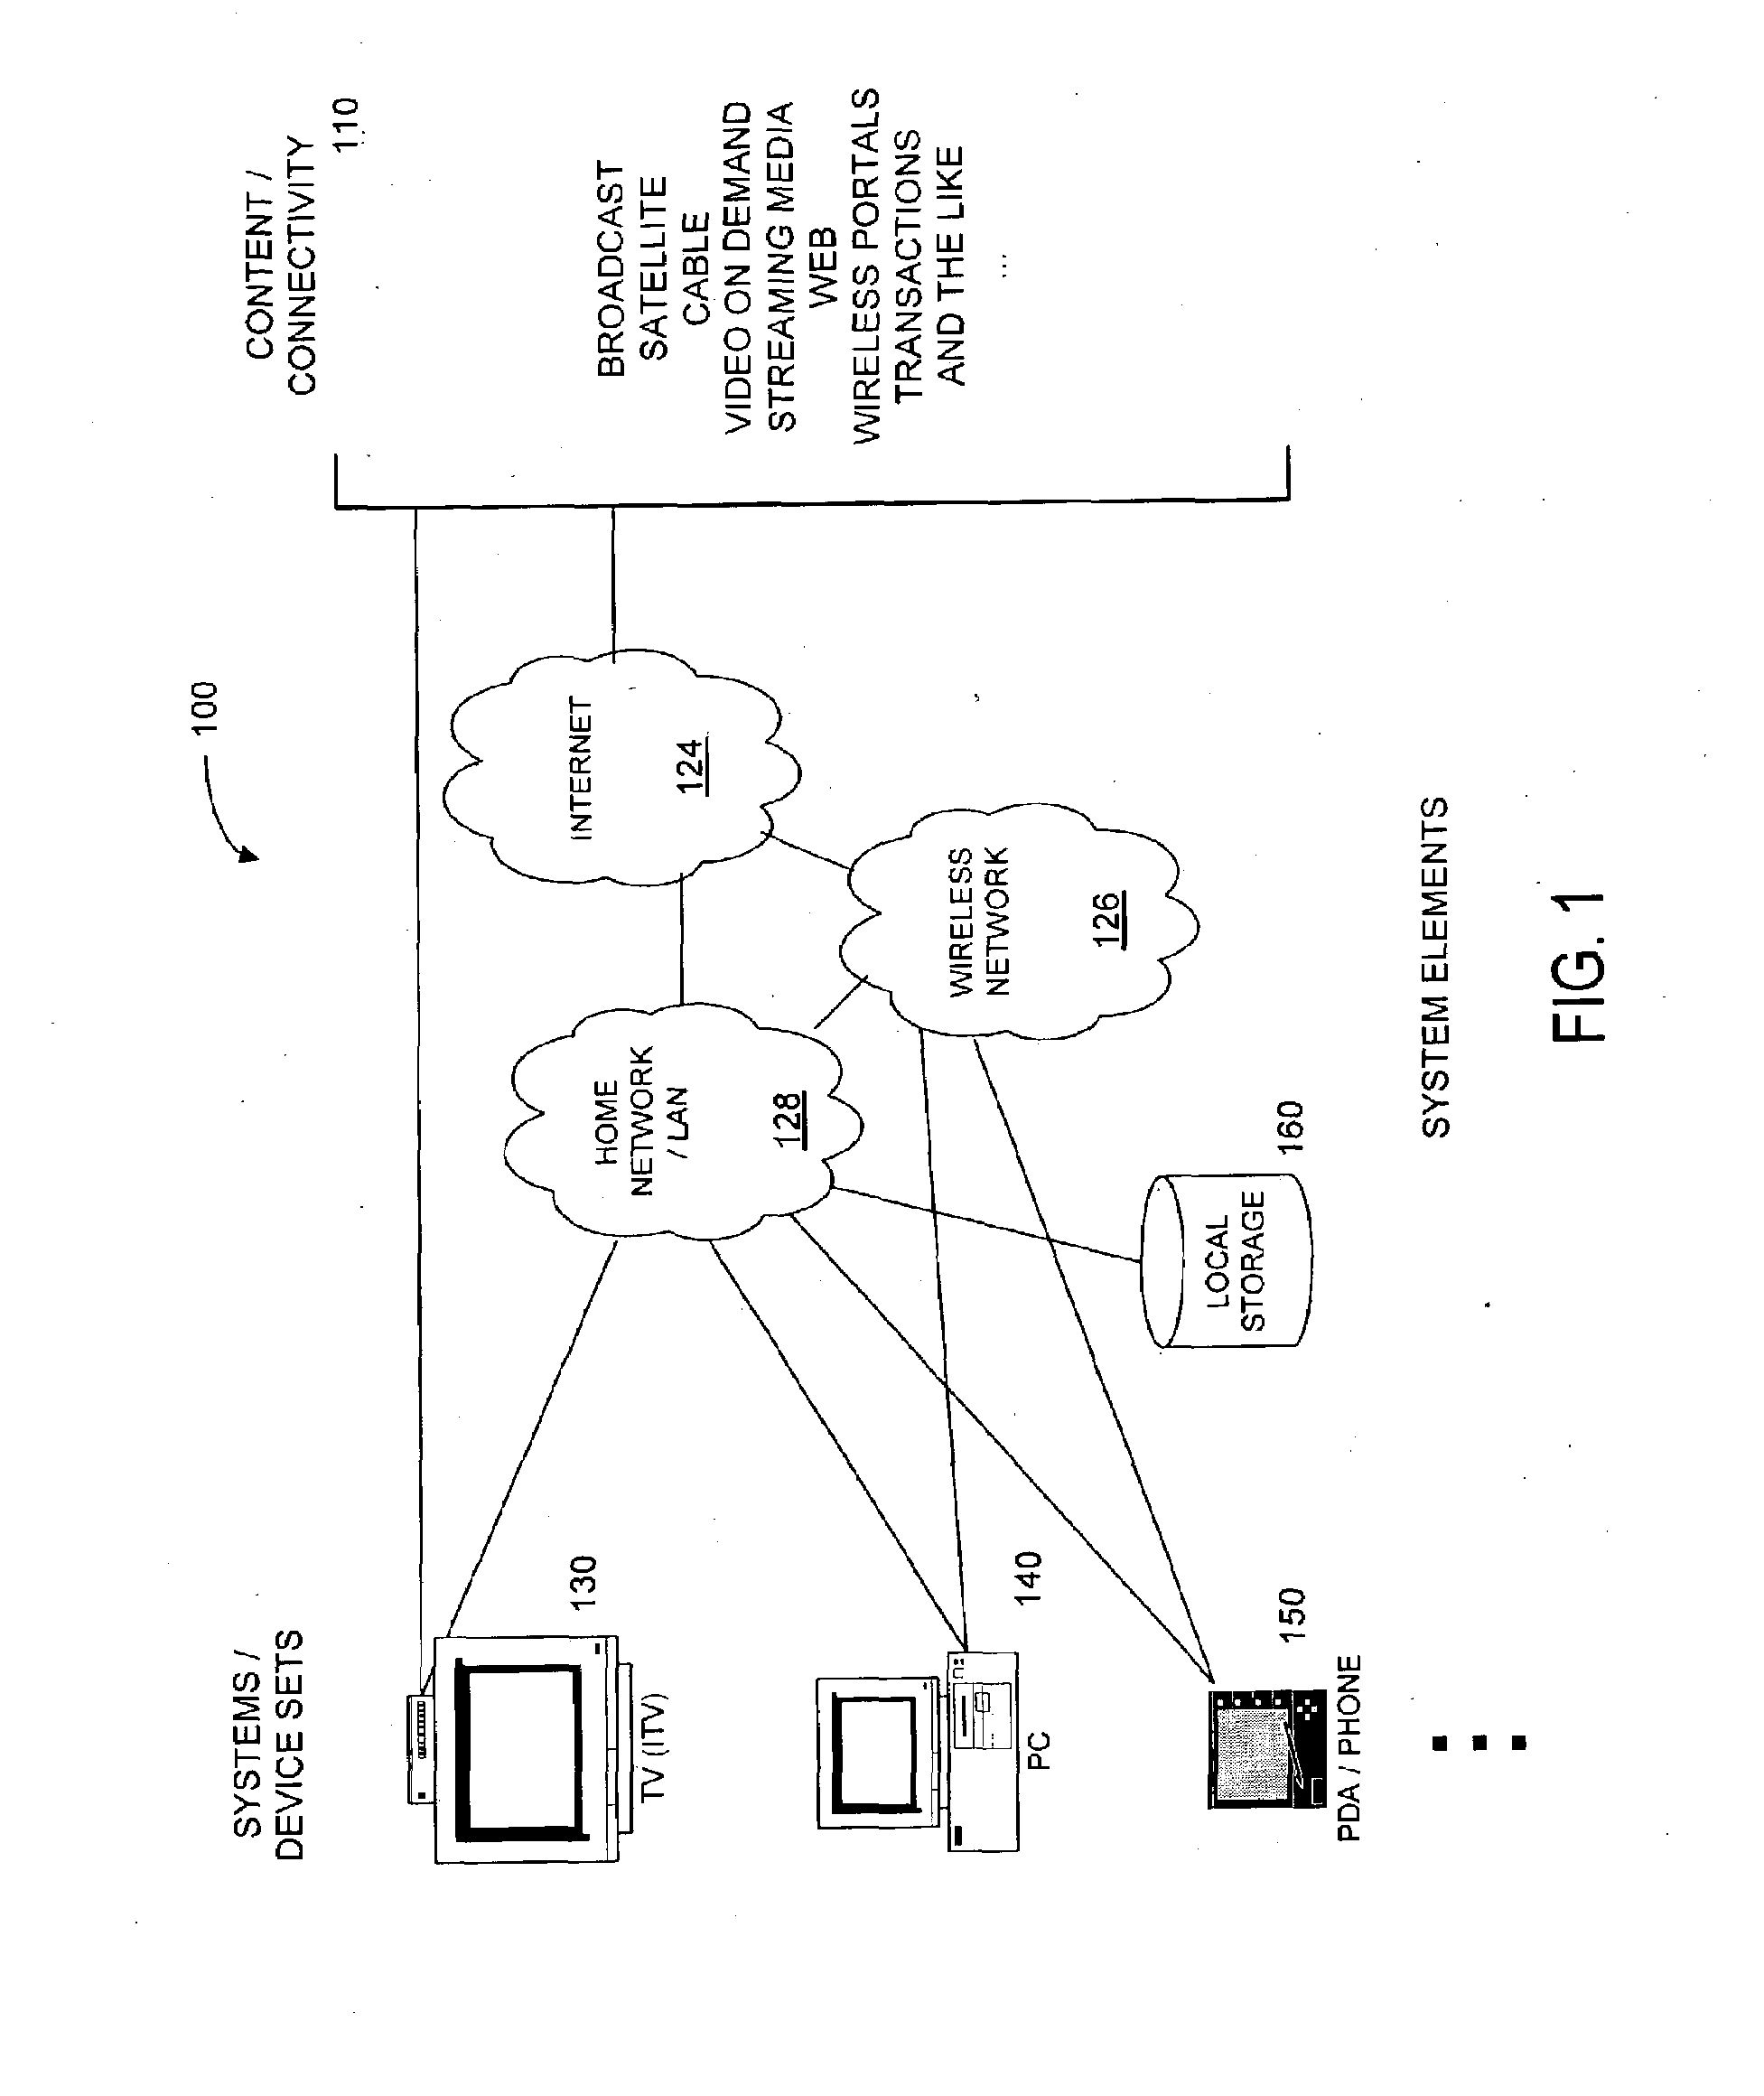 Method and Apparatus for Browsing Using Multiple Coordinated Device Sets